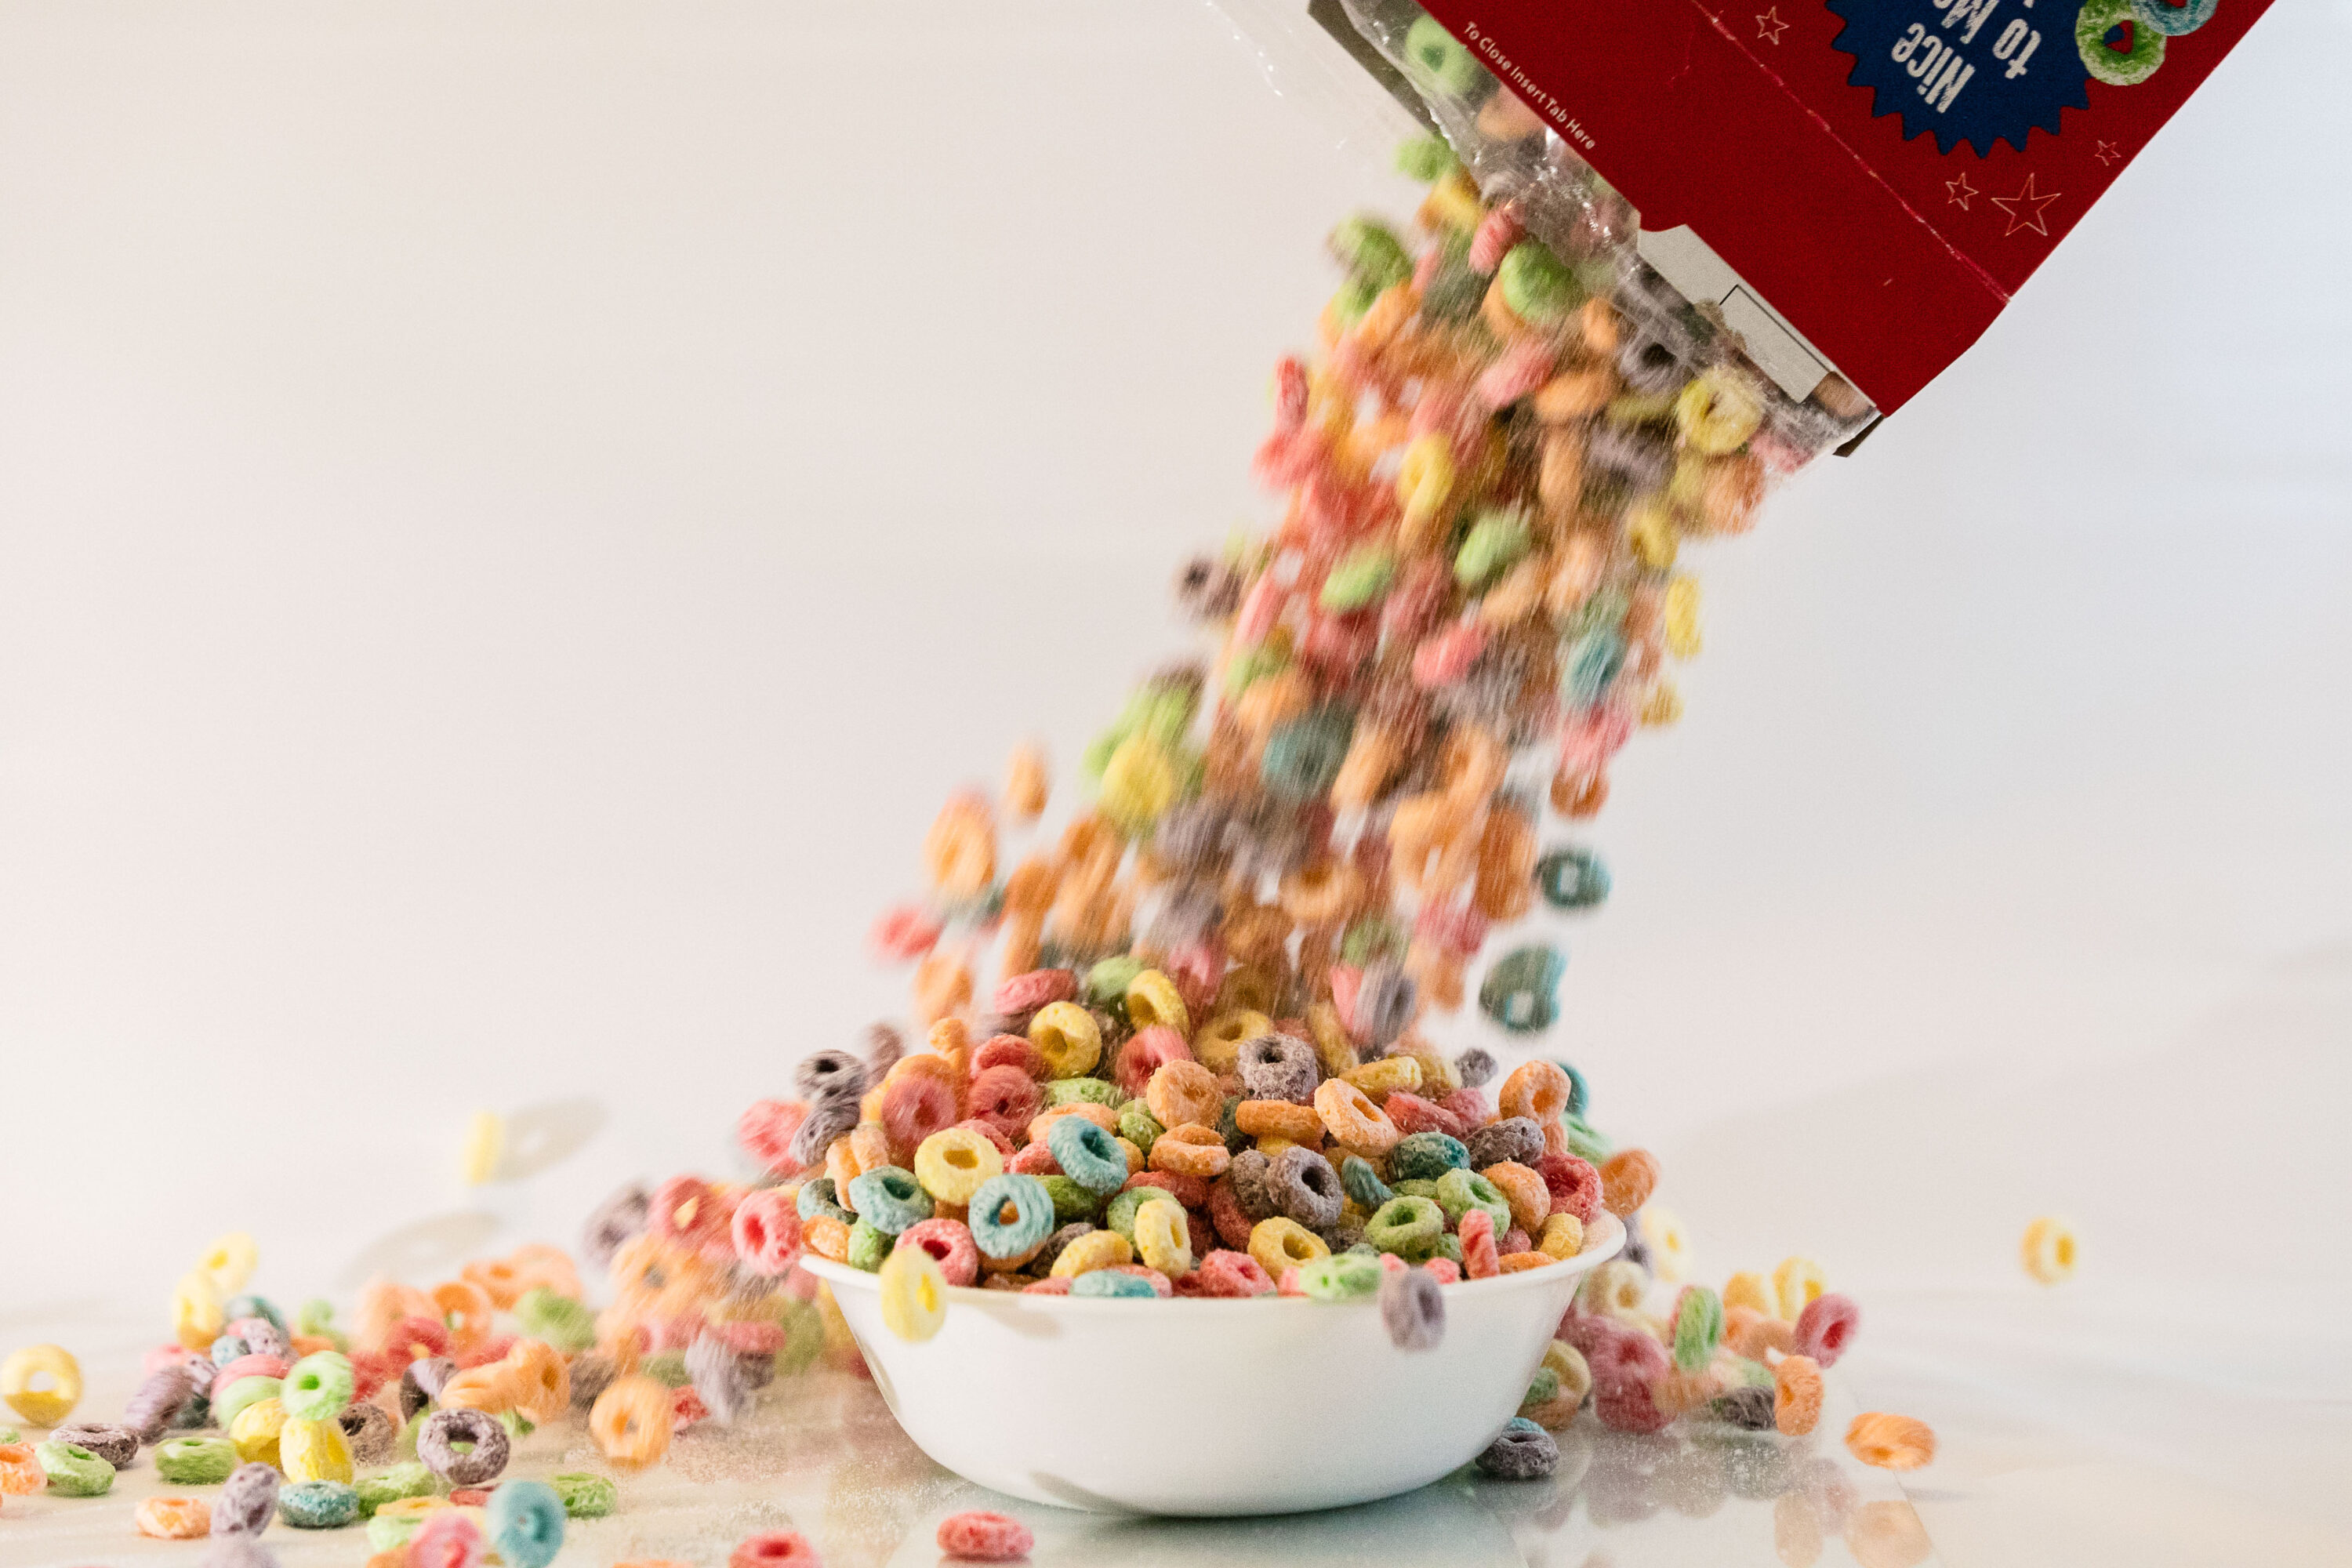 Tips for designing custom cereal boxes packaging that stand out on the shelves!